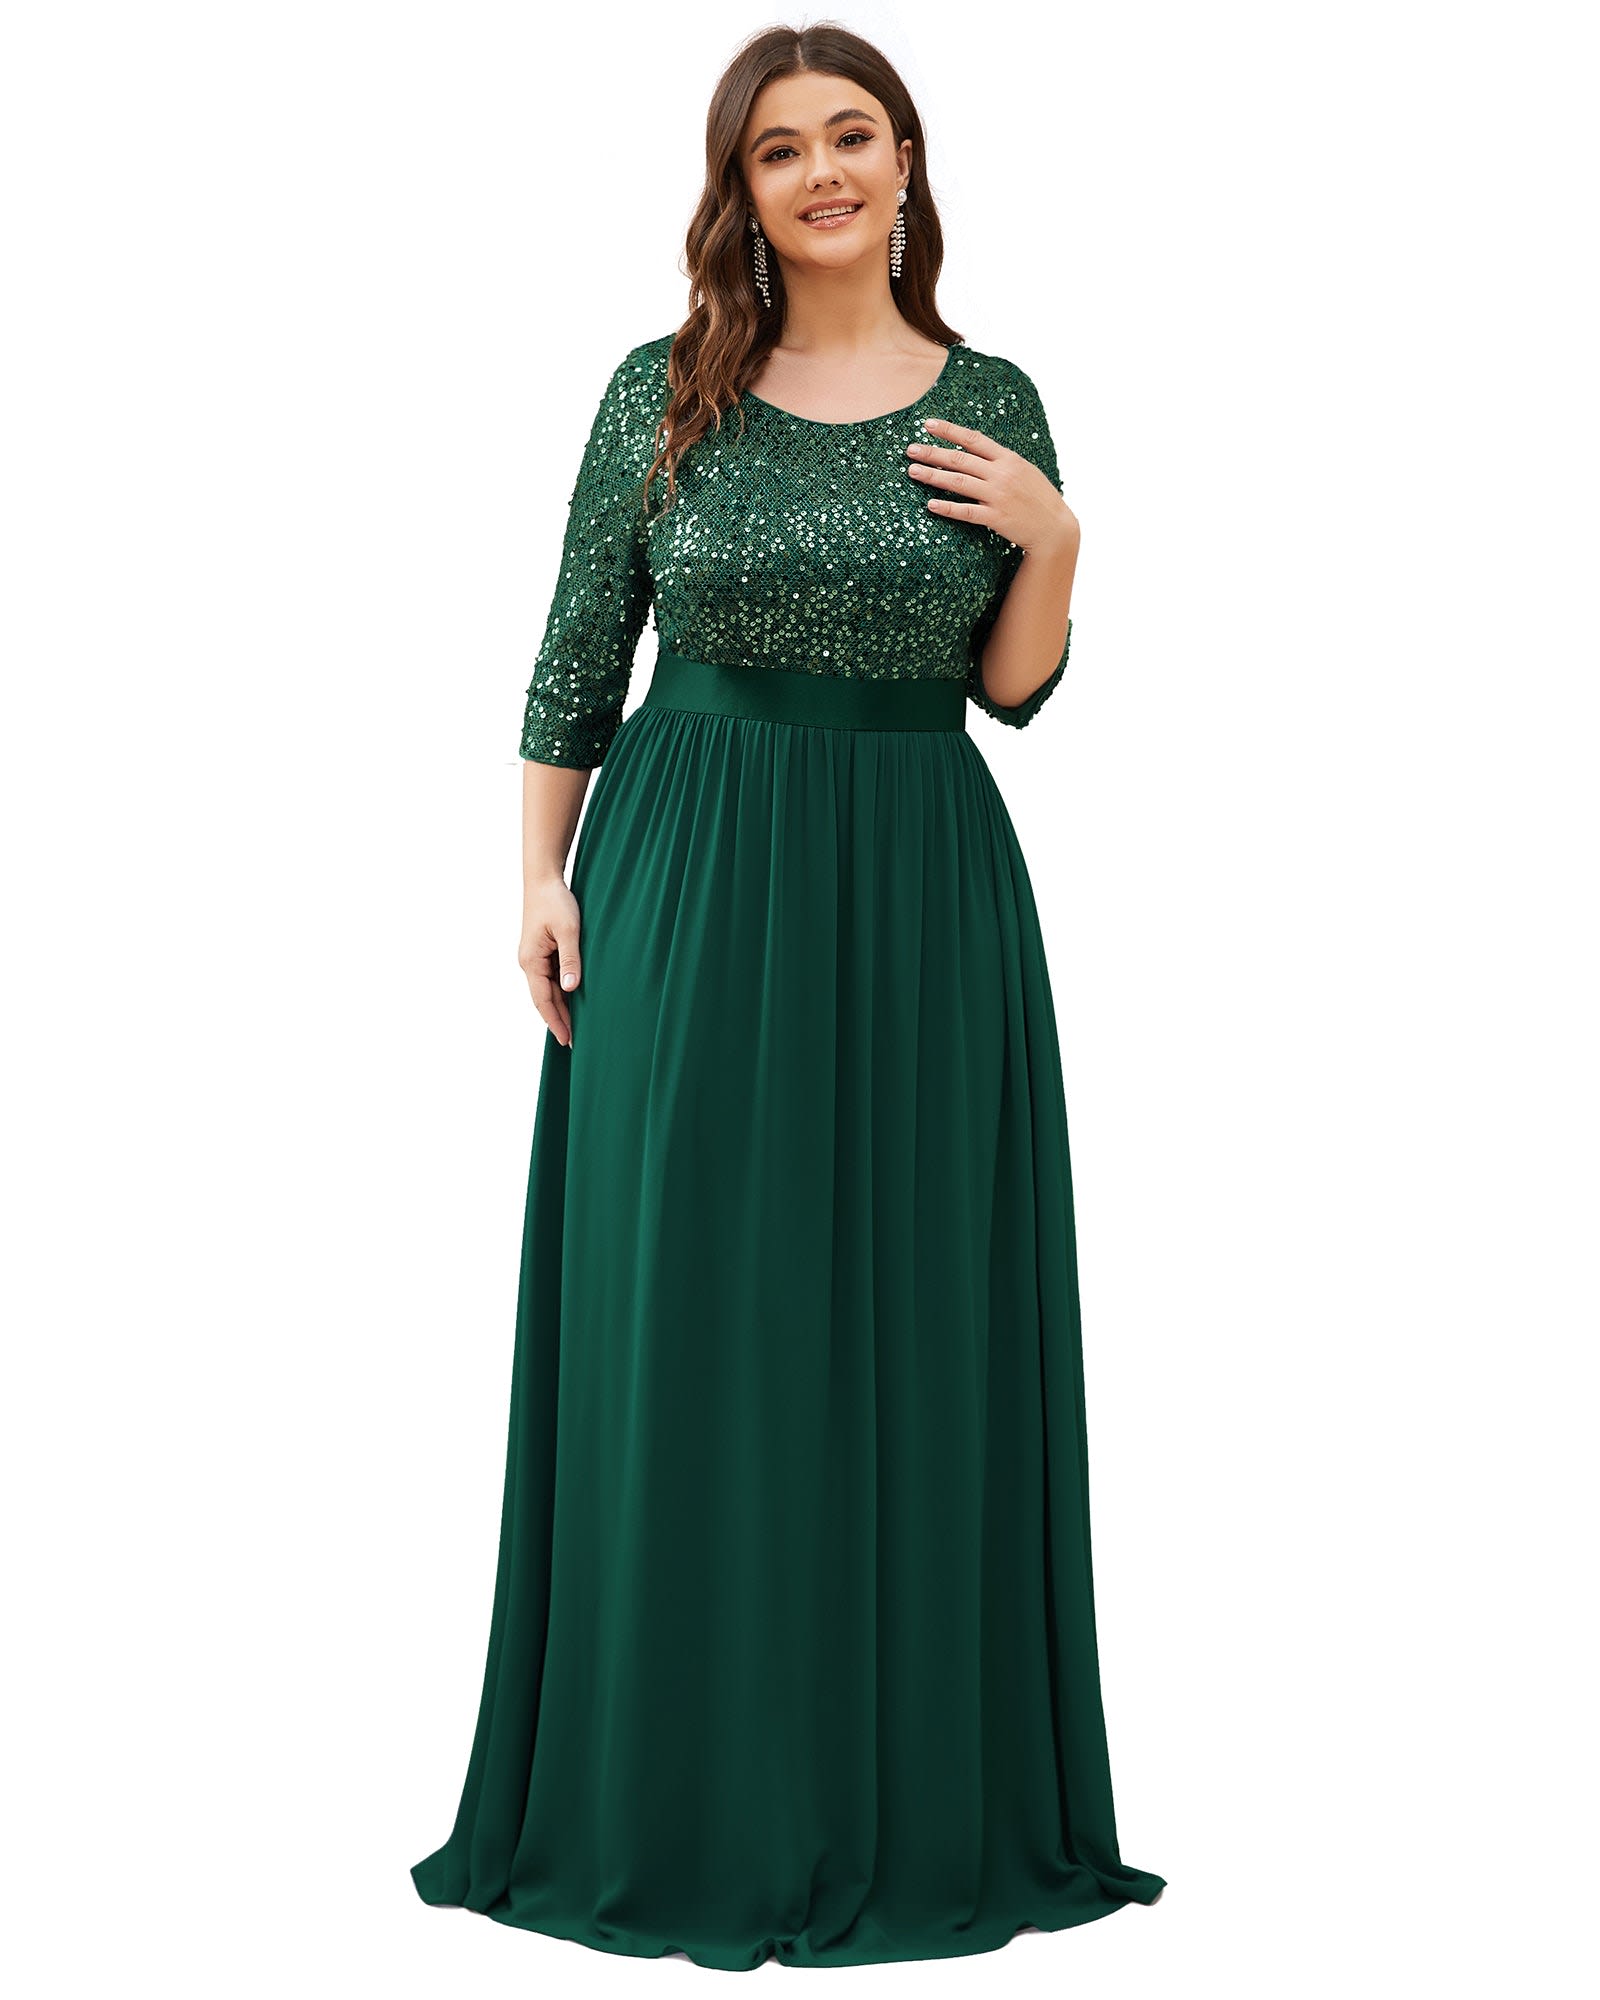 Triangle Cutout Bodice Maxi Bridesmaid Dress With Adjustable Straps In  Willow Green